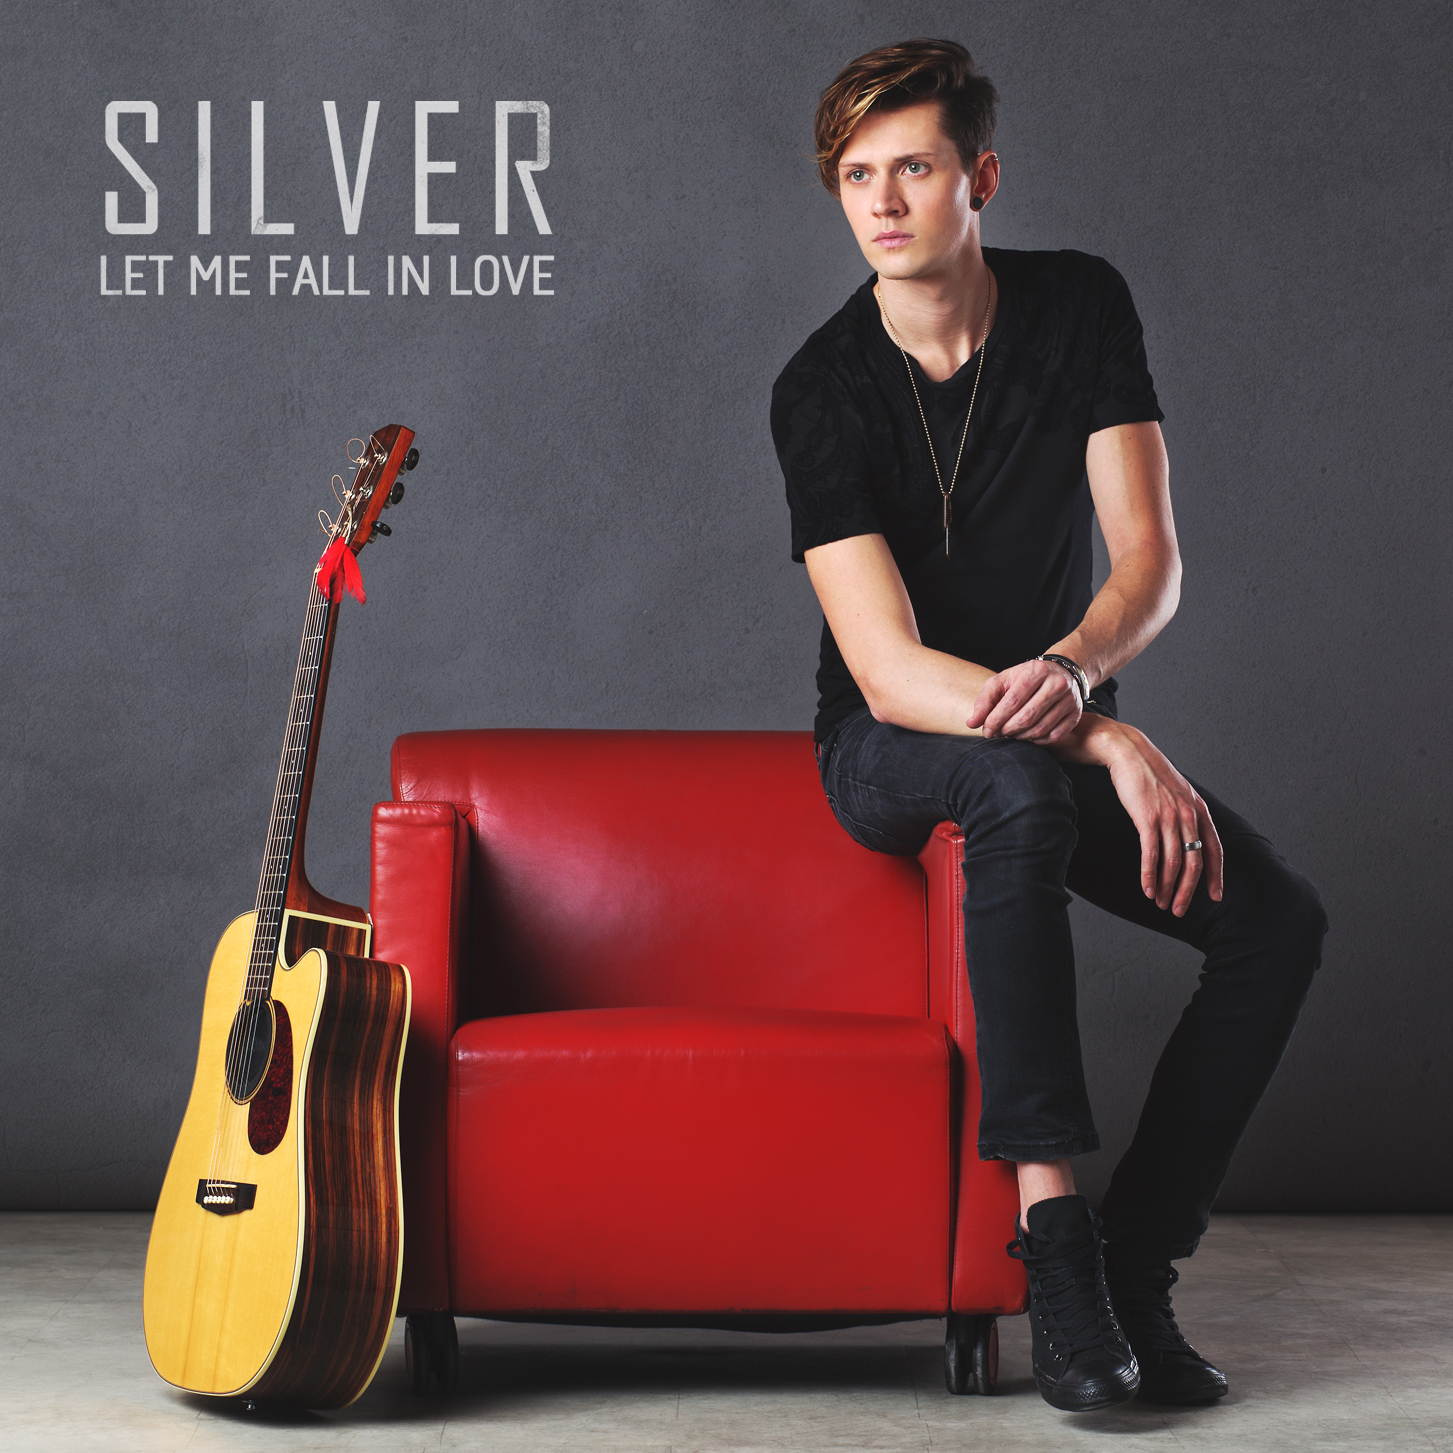 Cover: Let me fall in love (2018)